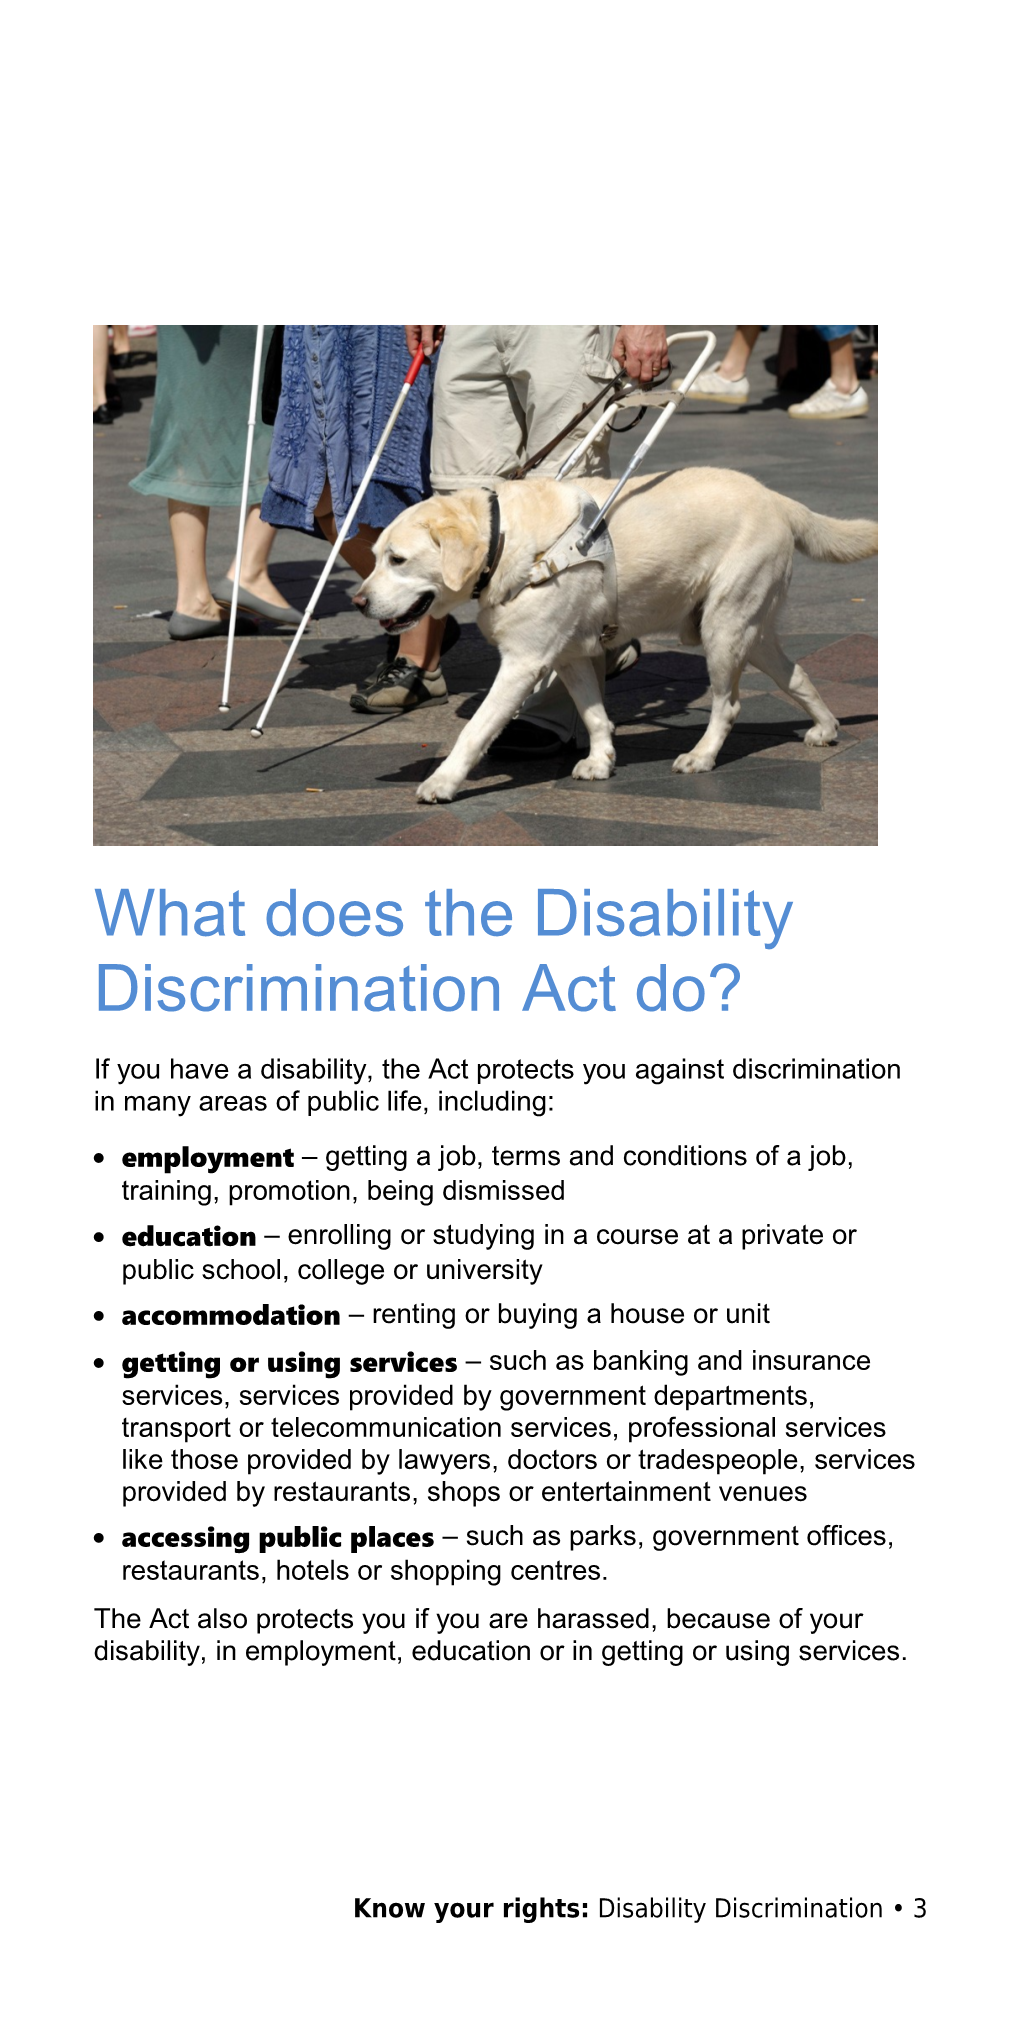 What Is Disability Discrimination?